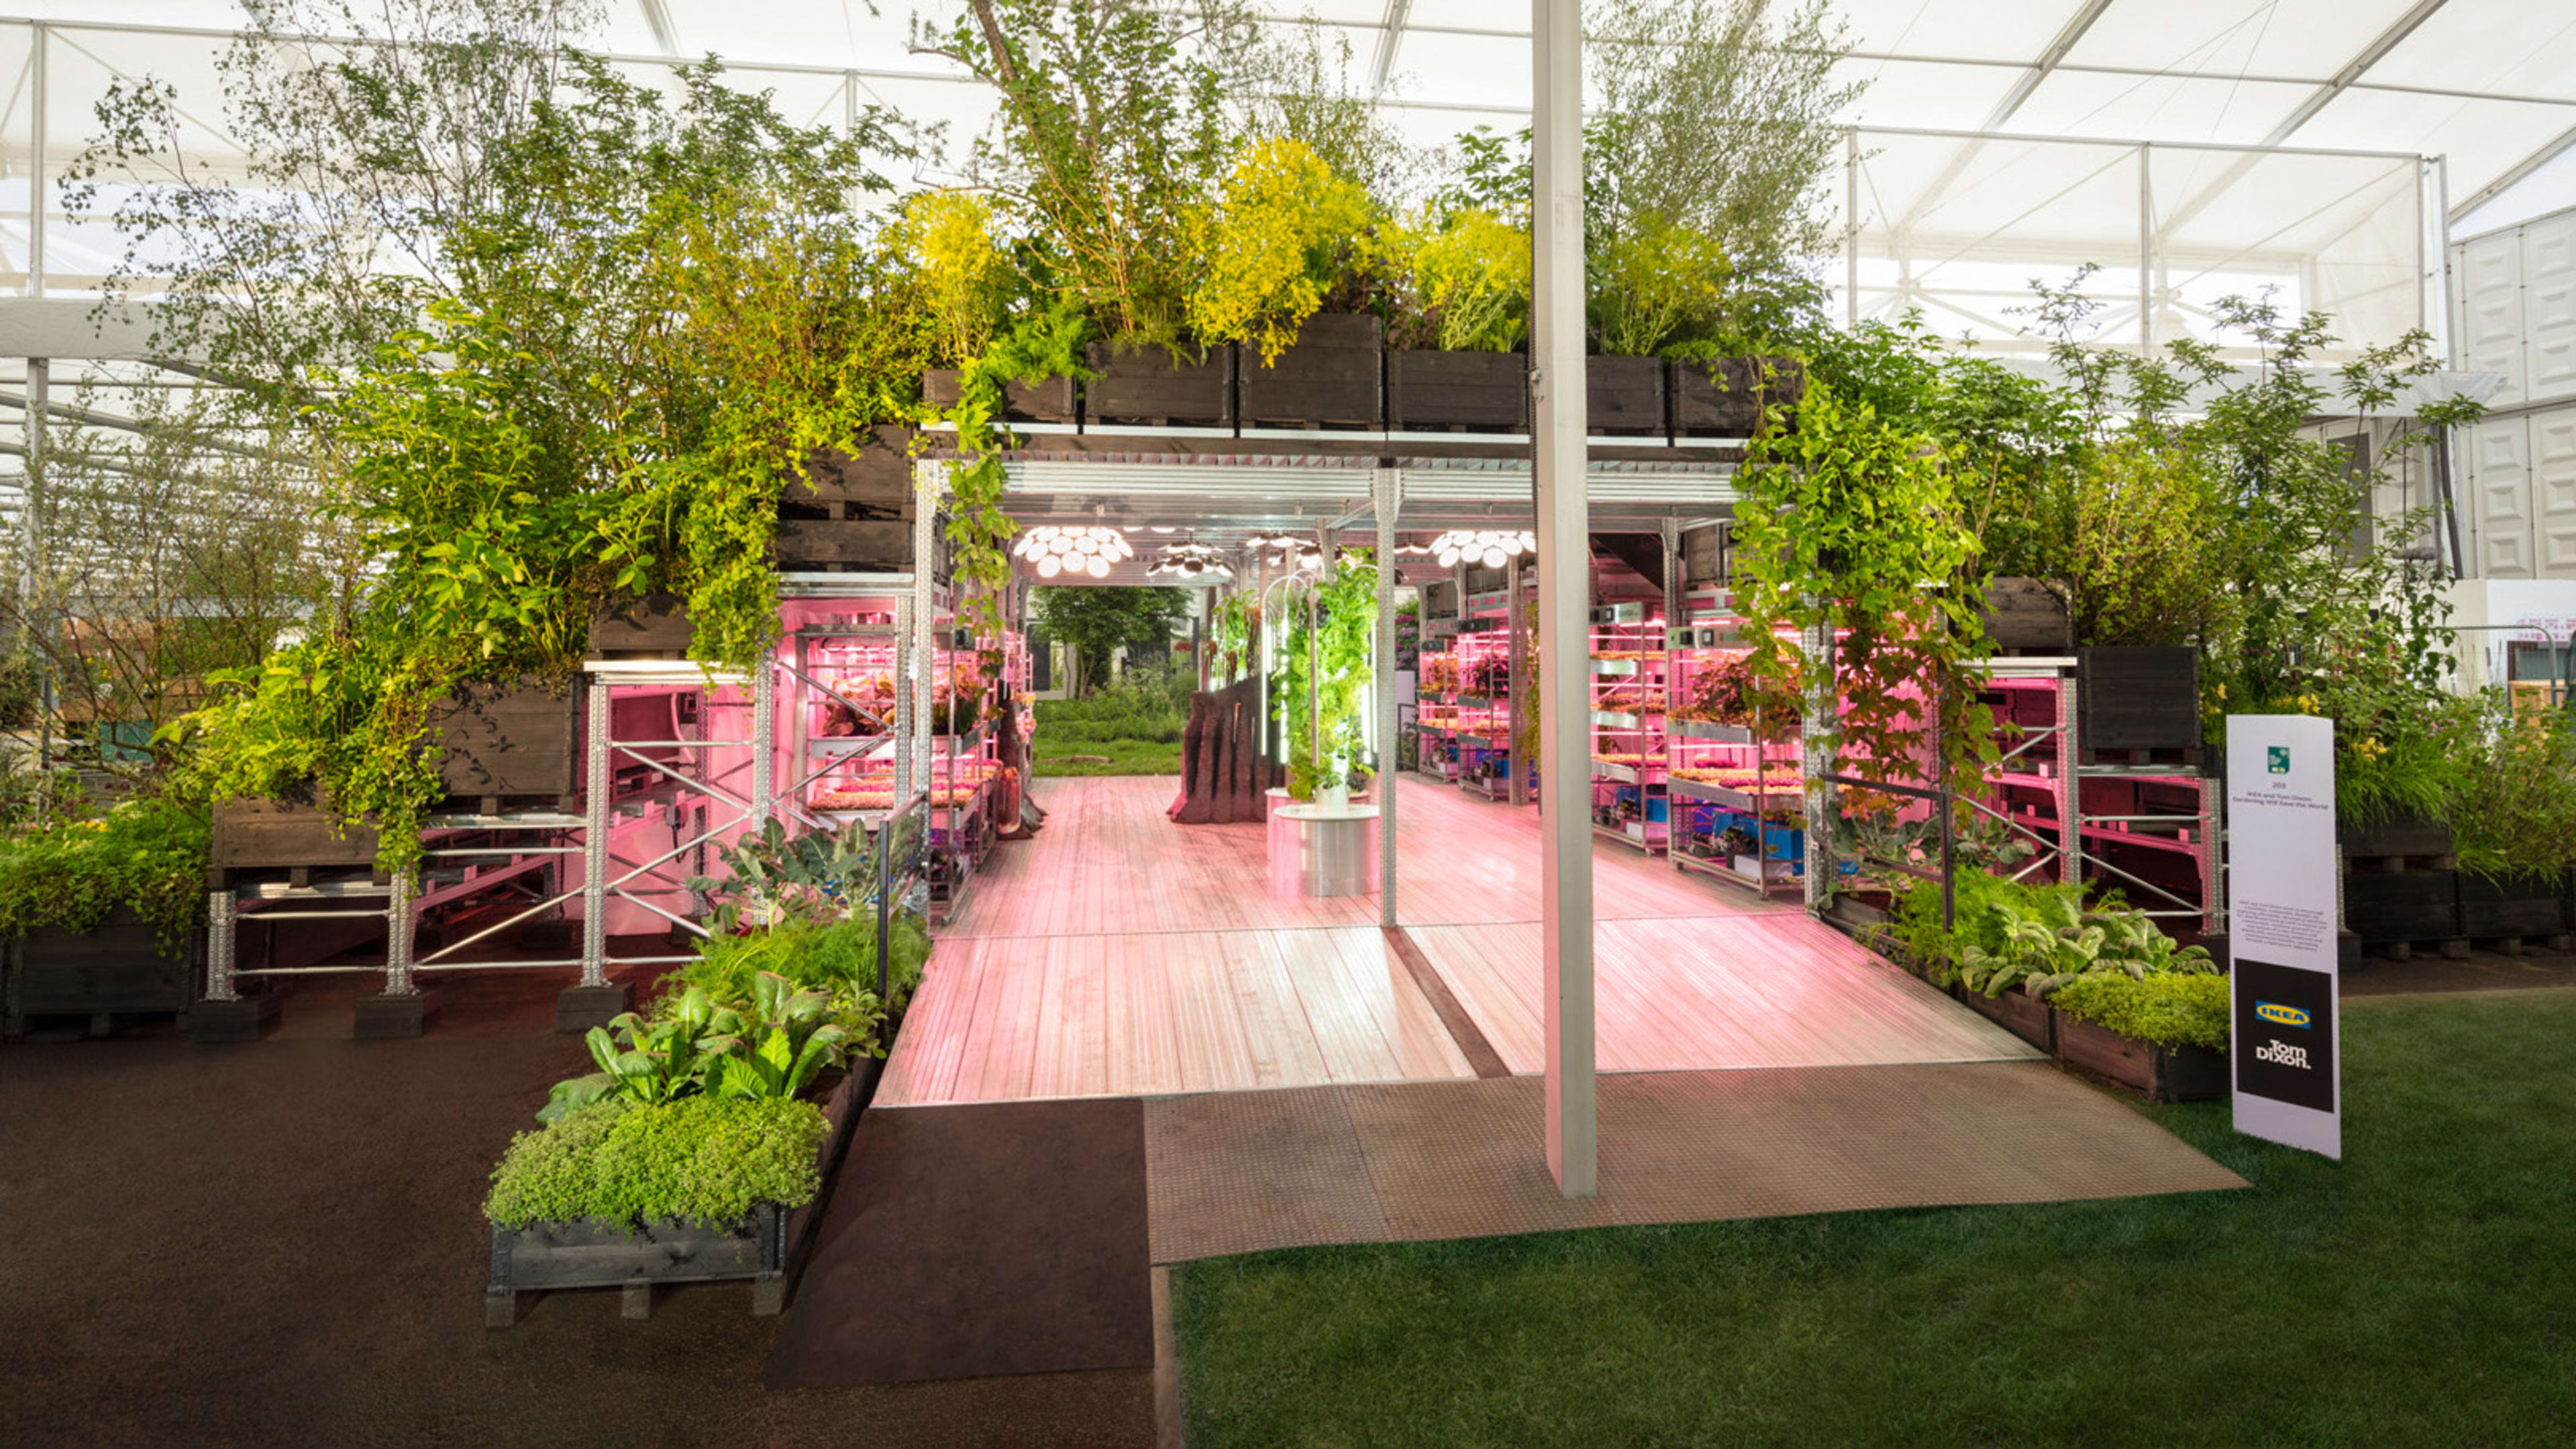 Here’s a first look at Ikea’s utopian urban gardening project